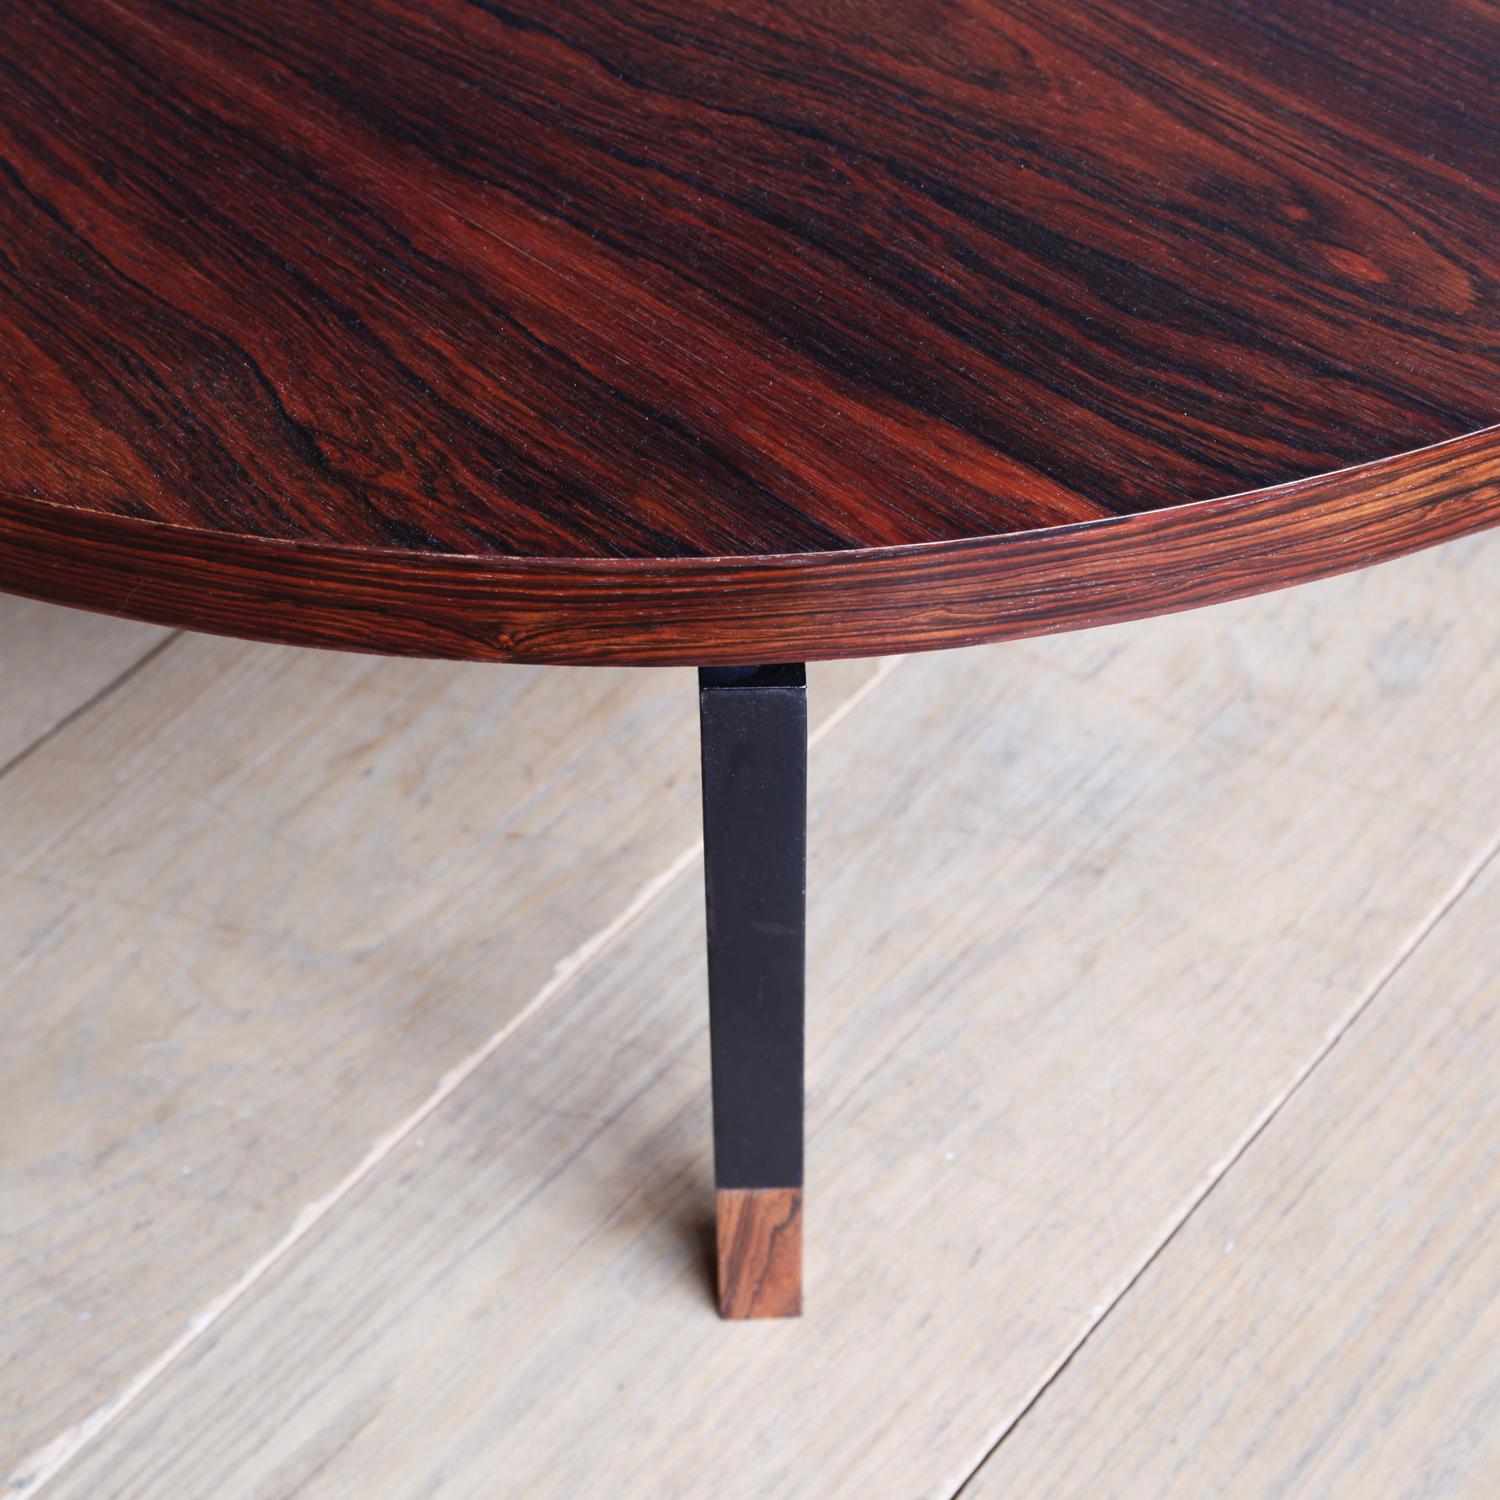 Painted Johannes Aasbjerg Circular Rosewood and Steel Coffee Table for Illums Bolighus